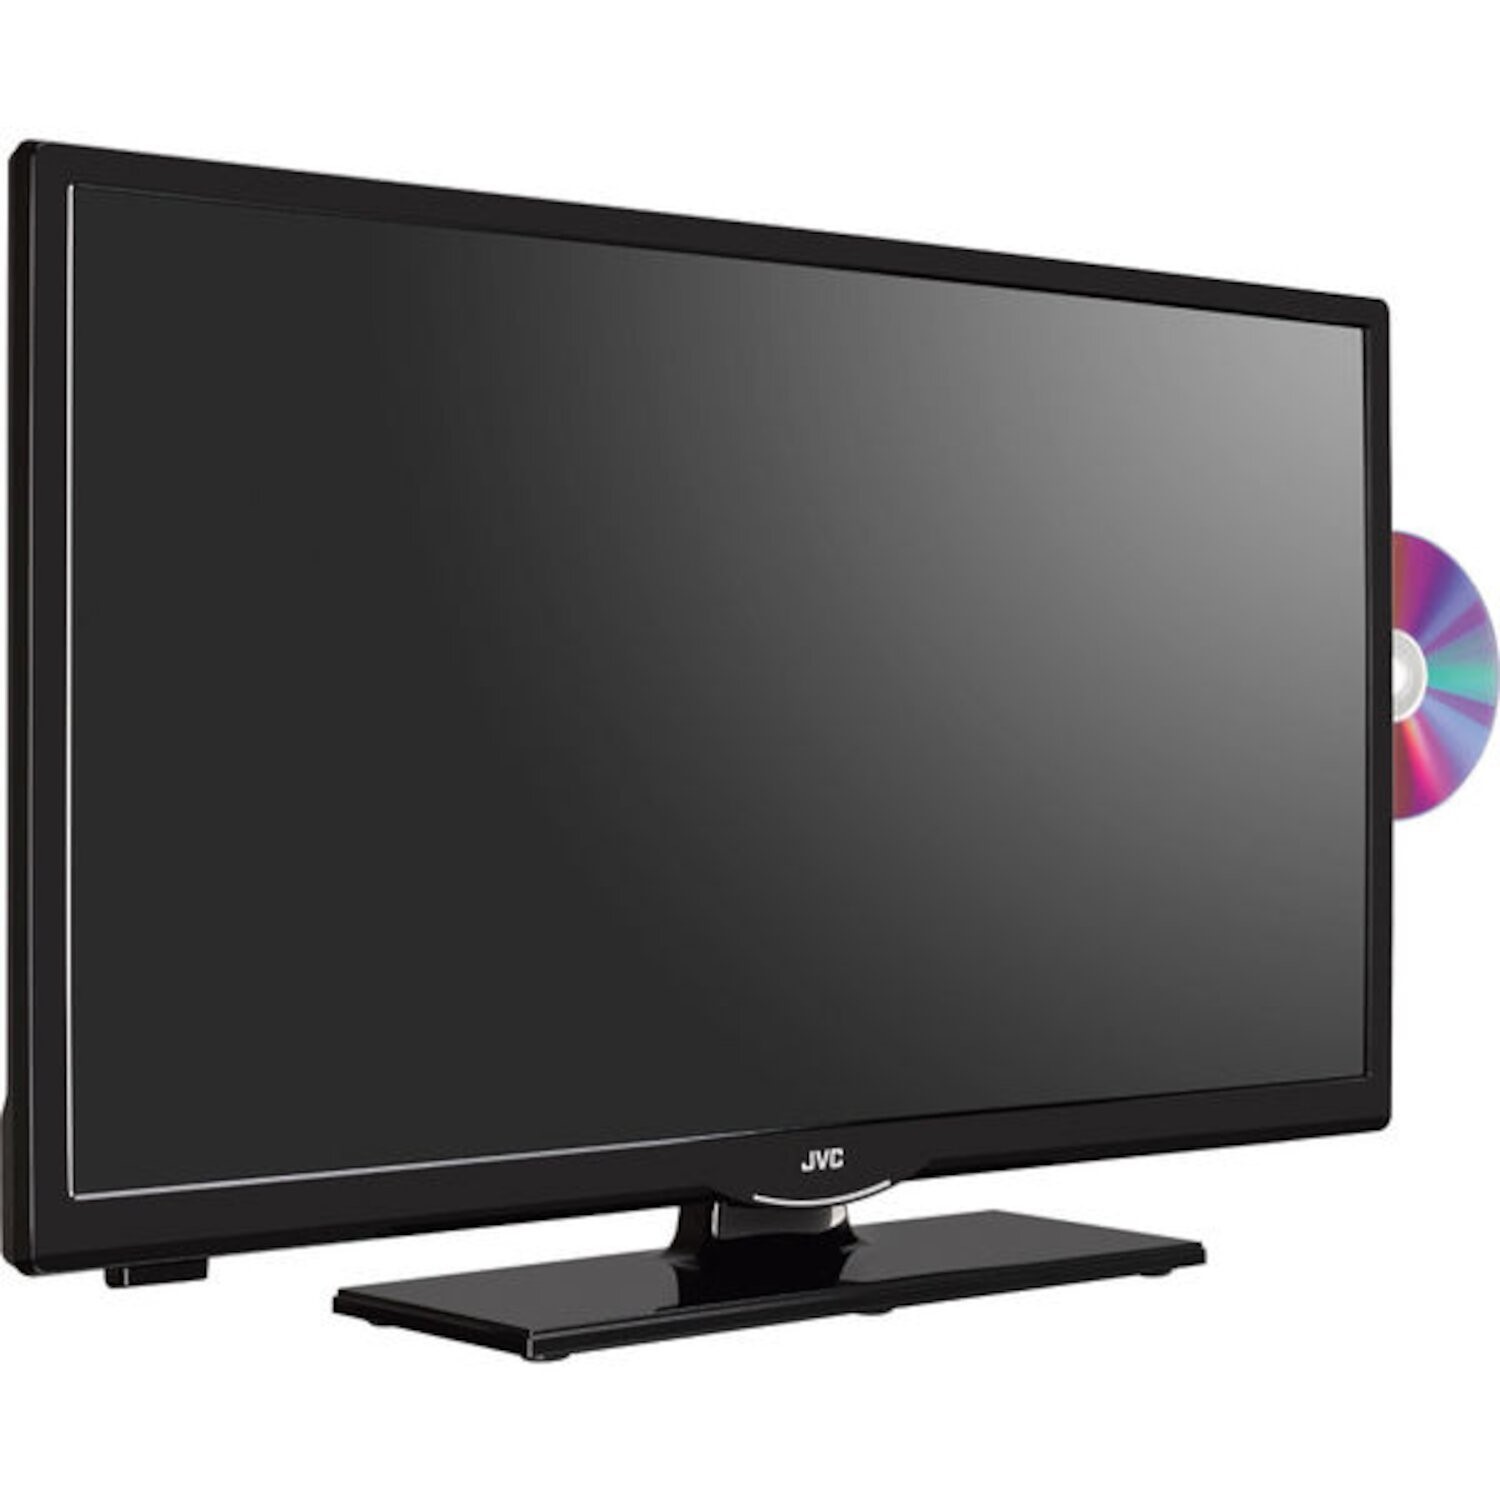 how-to-watch-dvd-on-smart-tv-without-dvd-player